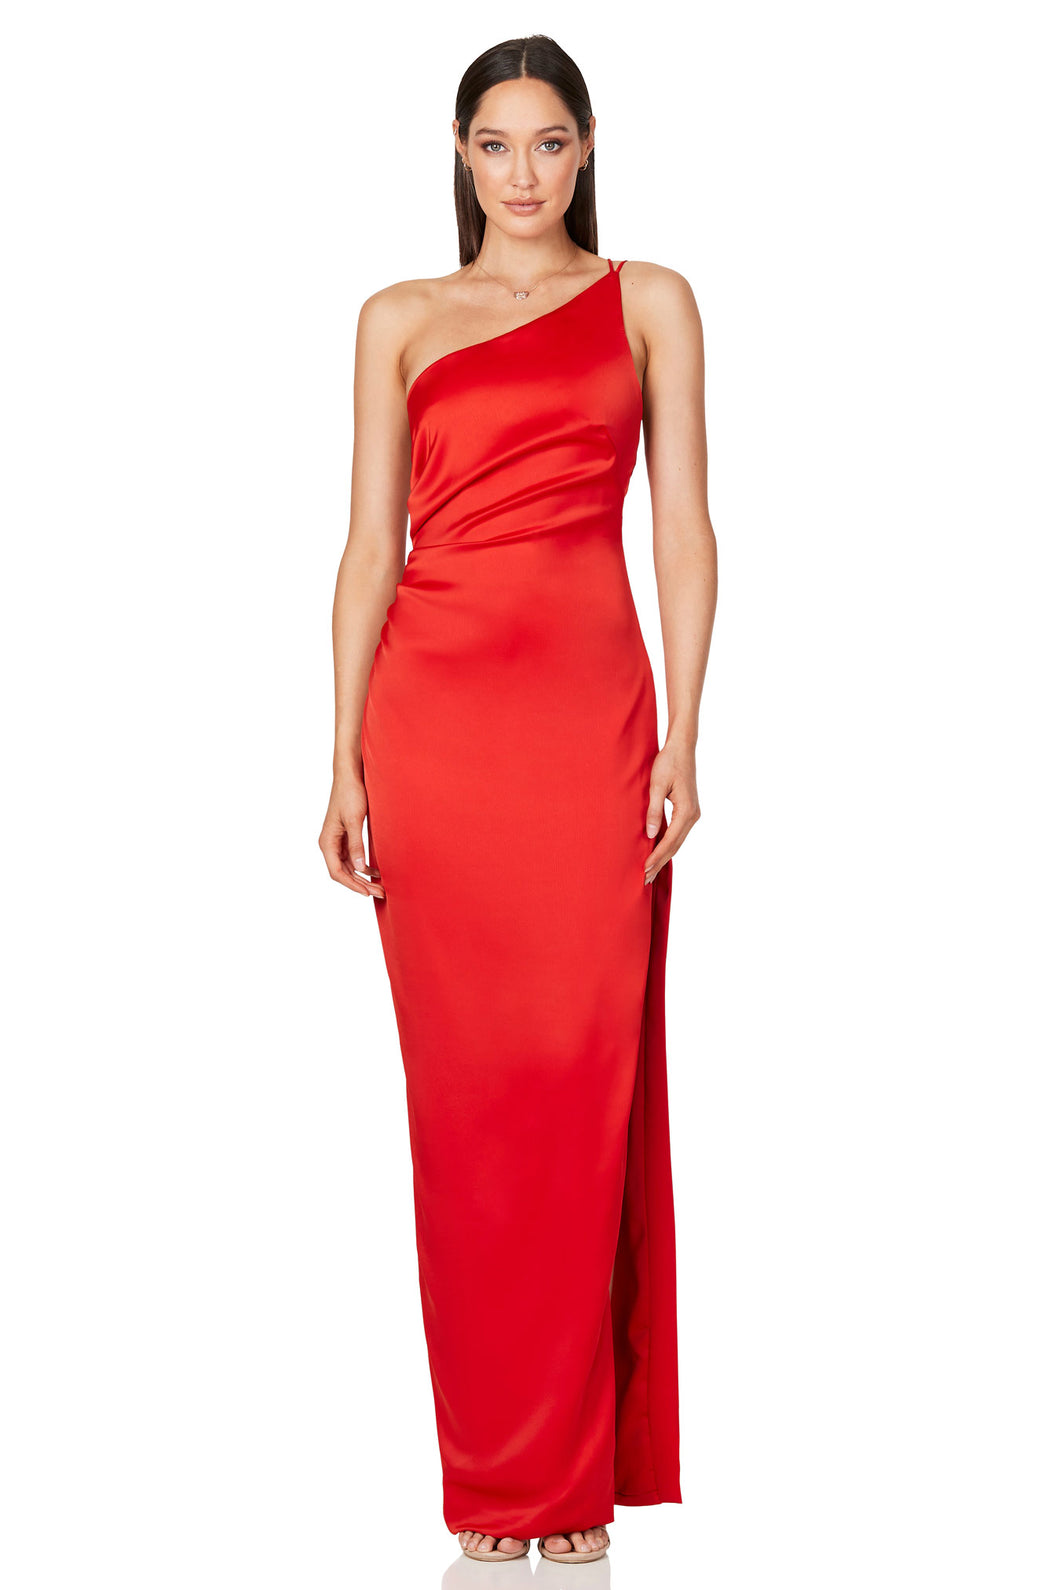 NOOKIE GYPSY GOWN - RED